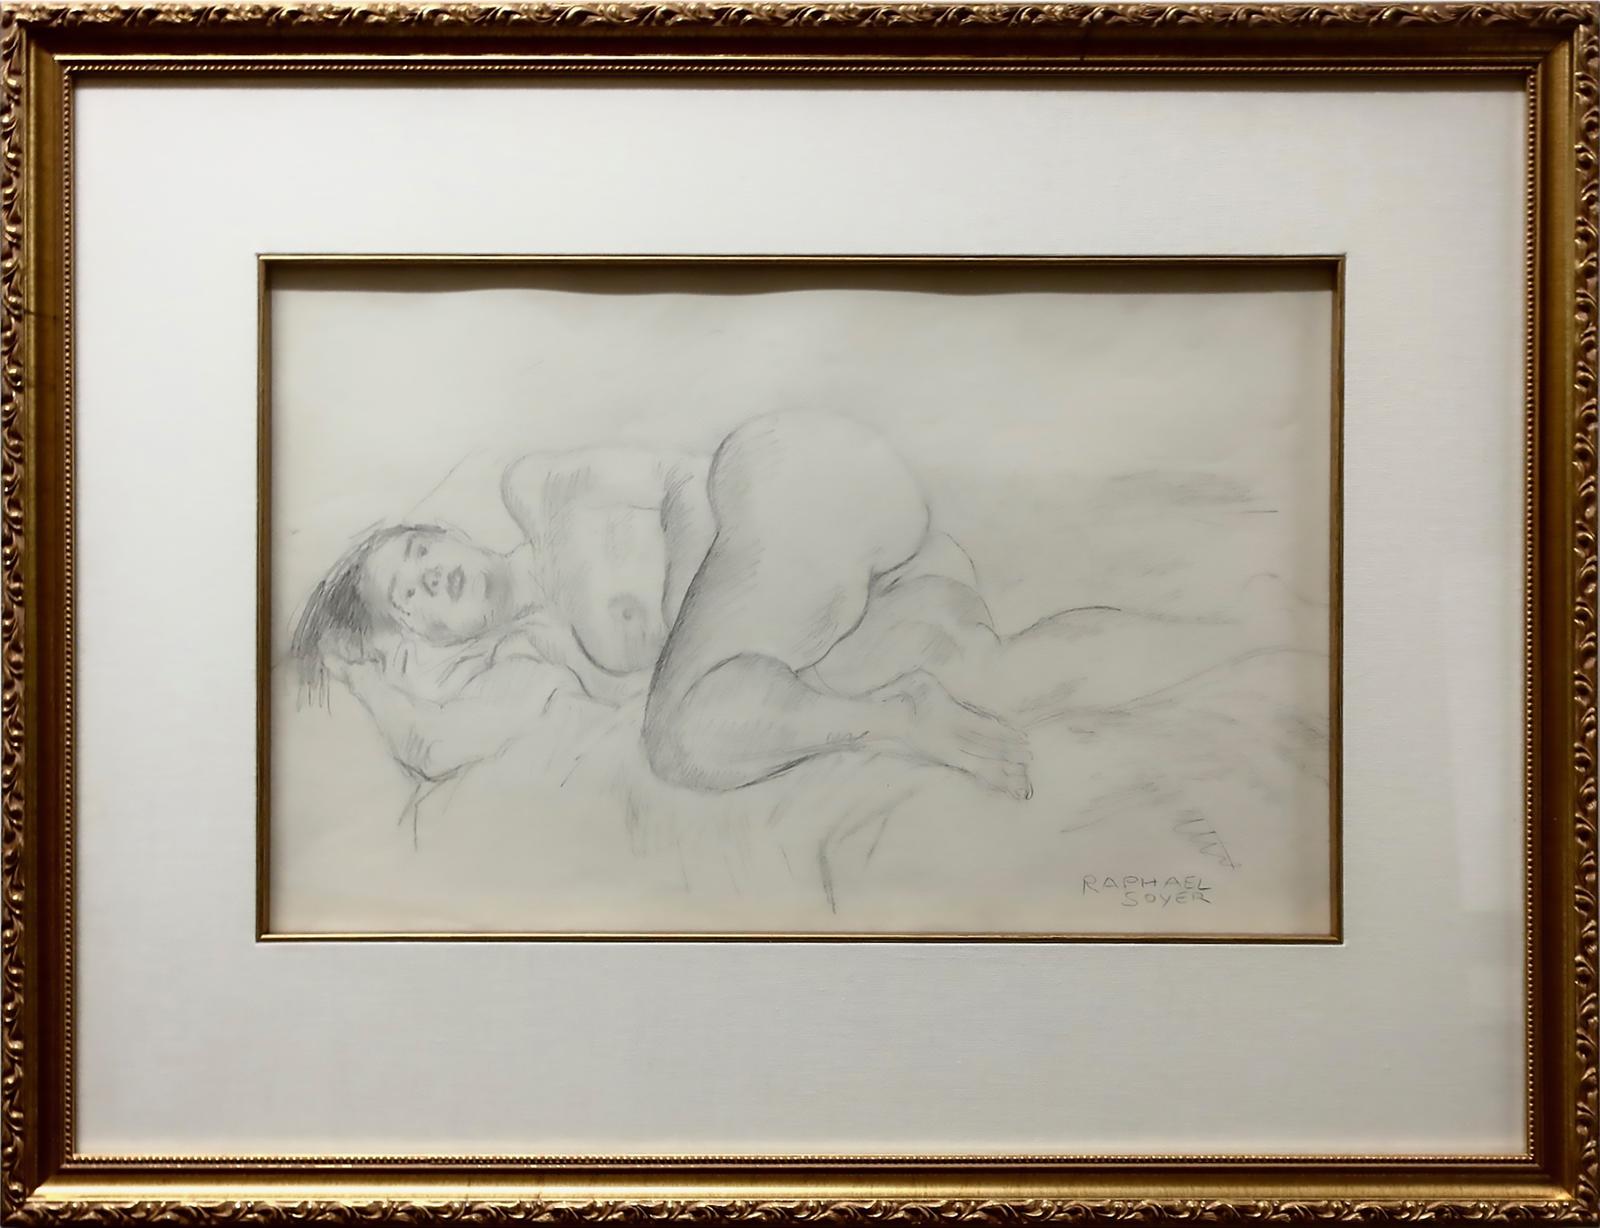 Raphael Soyer (1899-1987) - Untitled (Reclining Nude Daydreaming)